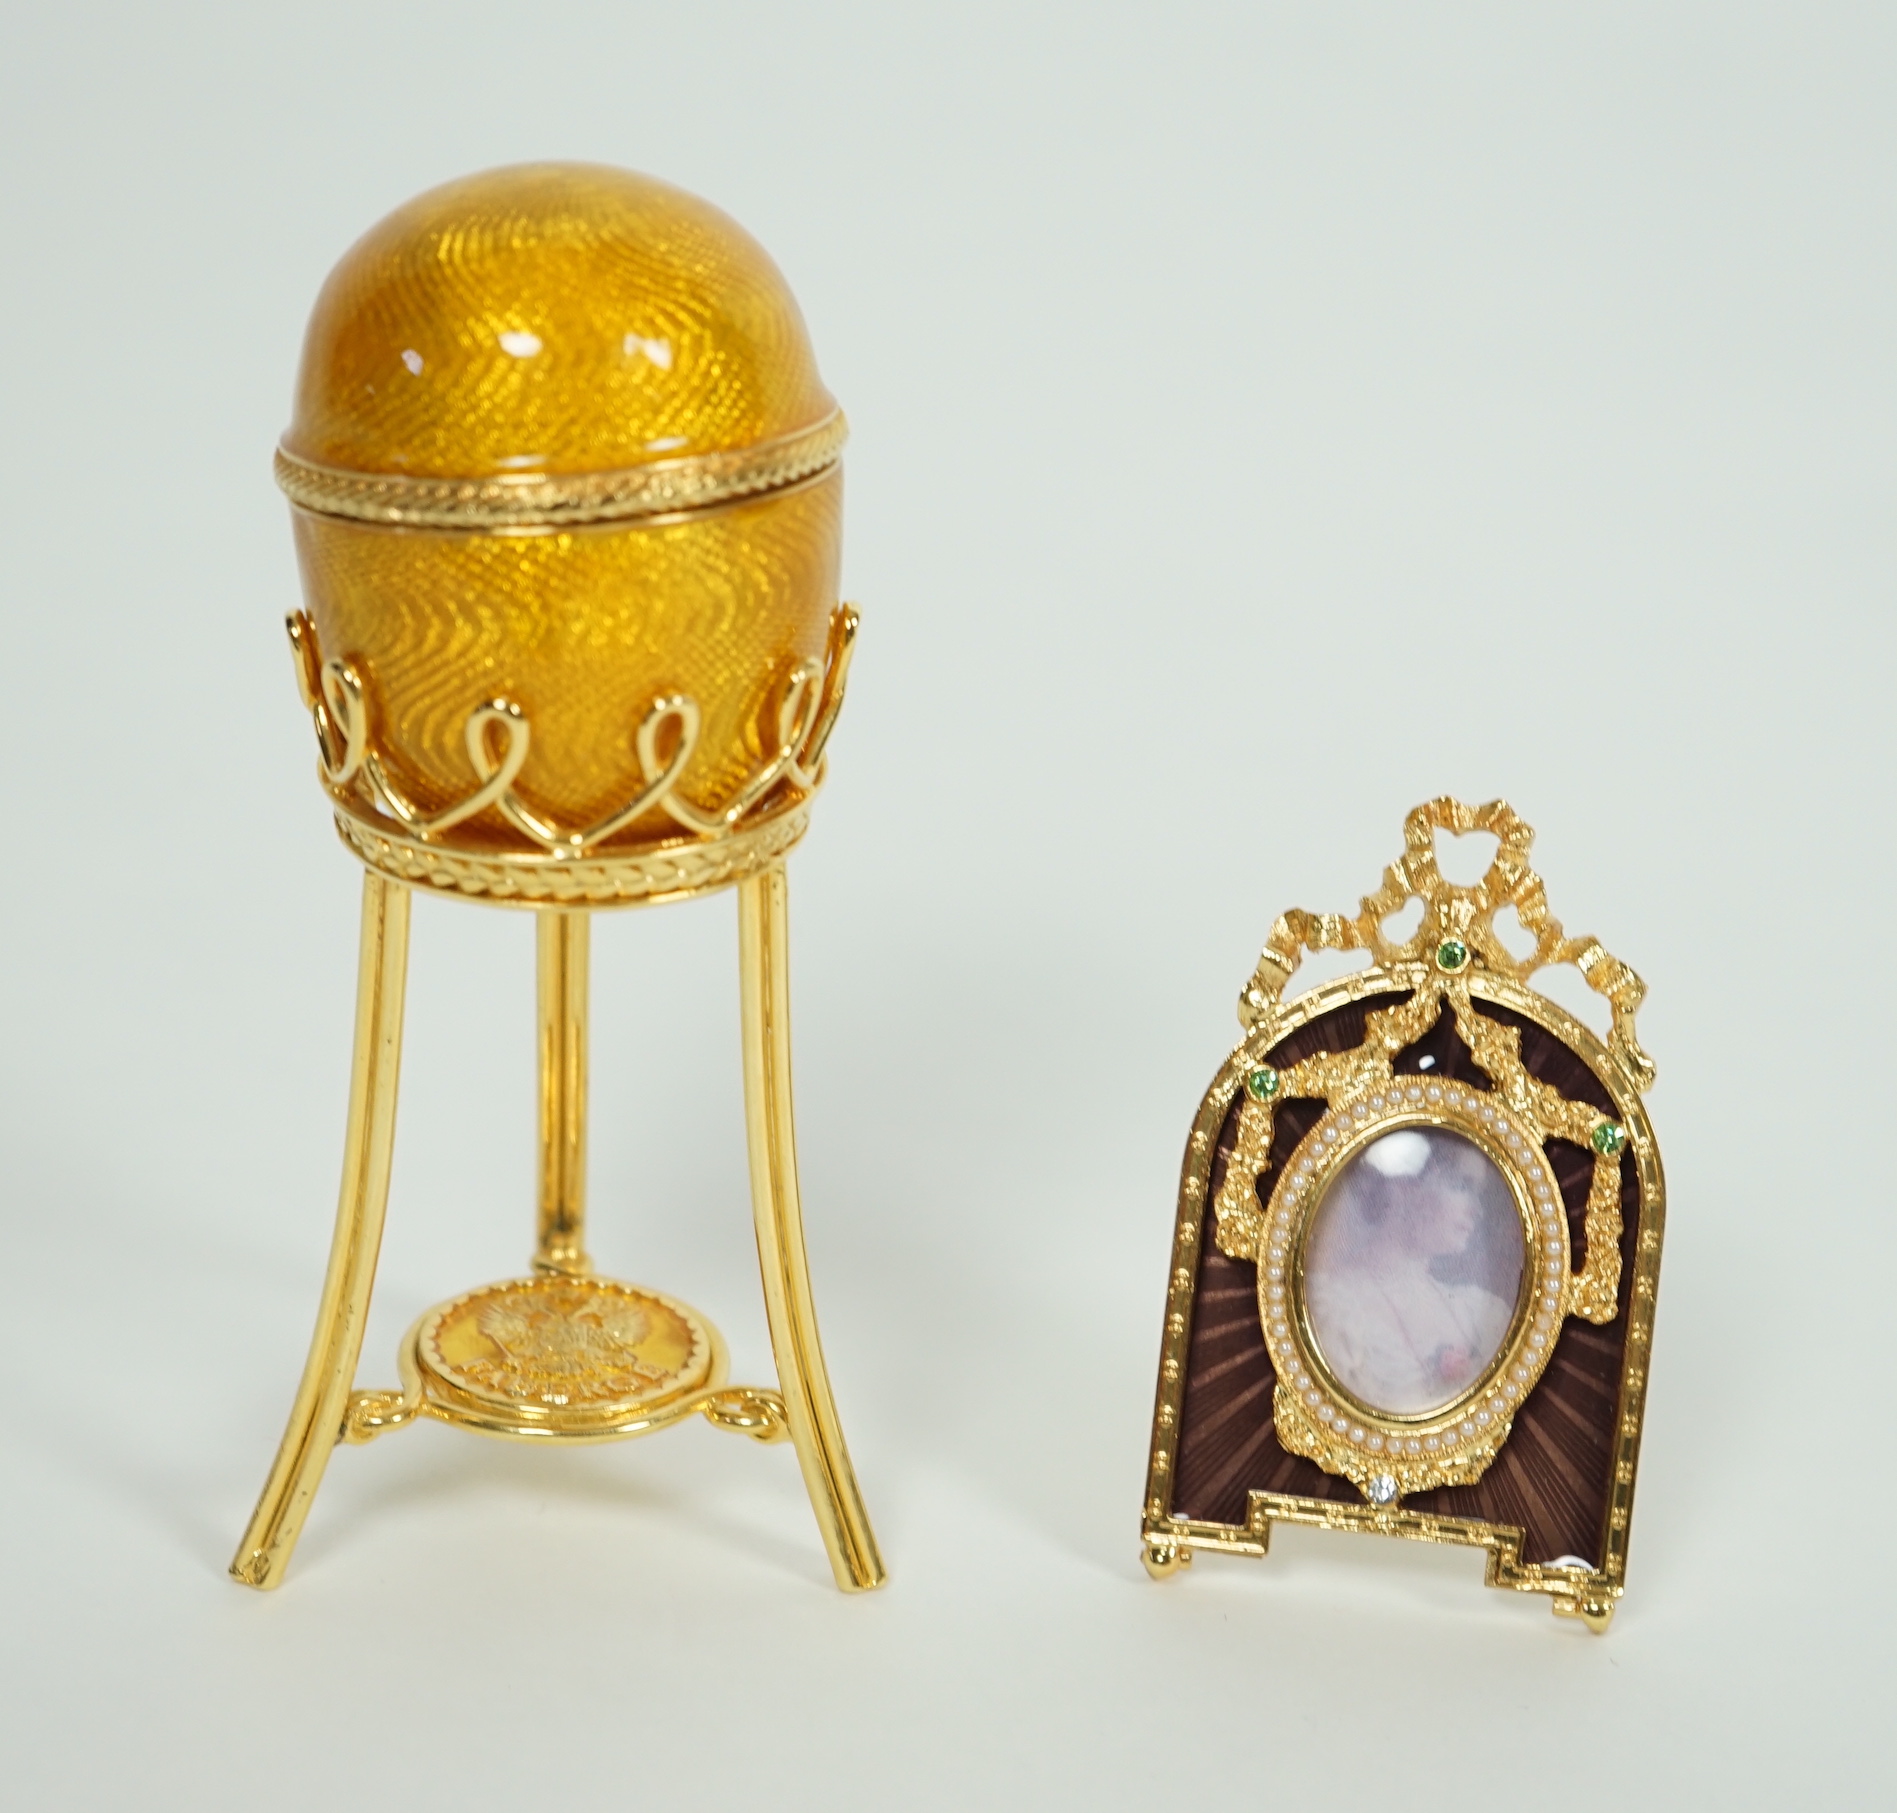 A Fabergé Imperial Collection Menagerie Rabbit Surprise Egg on stand together with a Fabergé gilt and enamel photograph frame